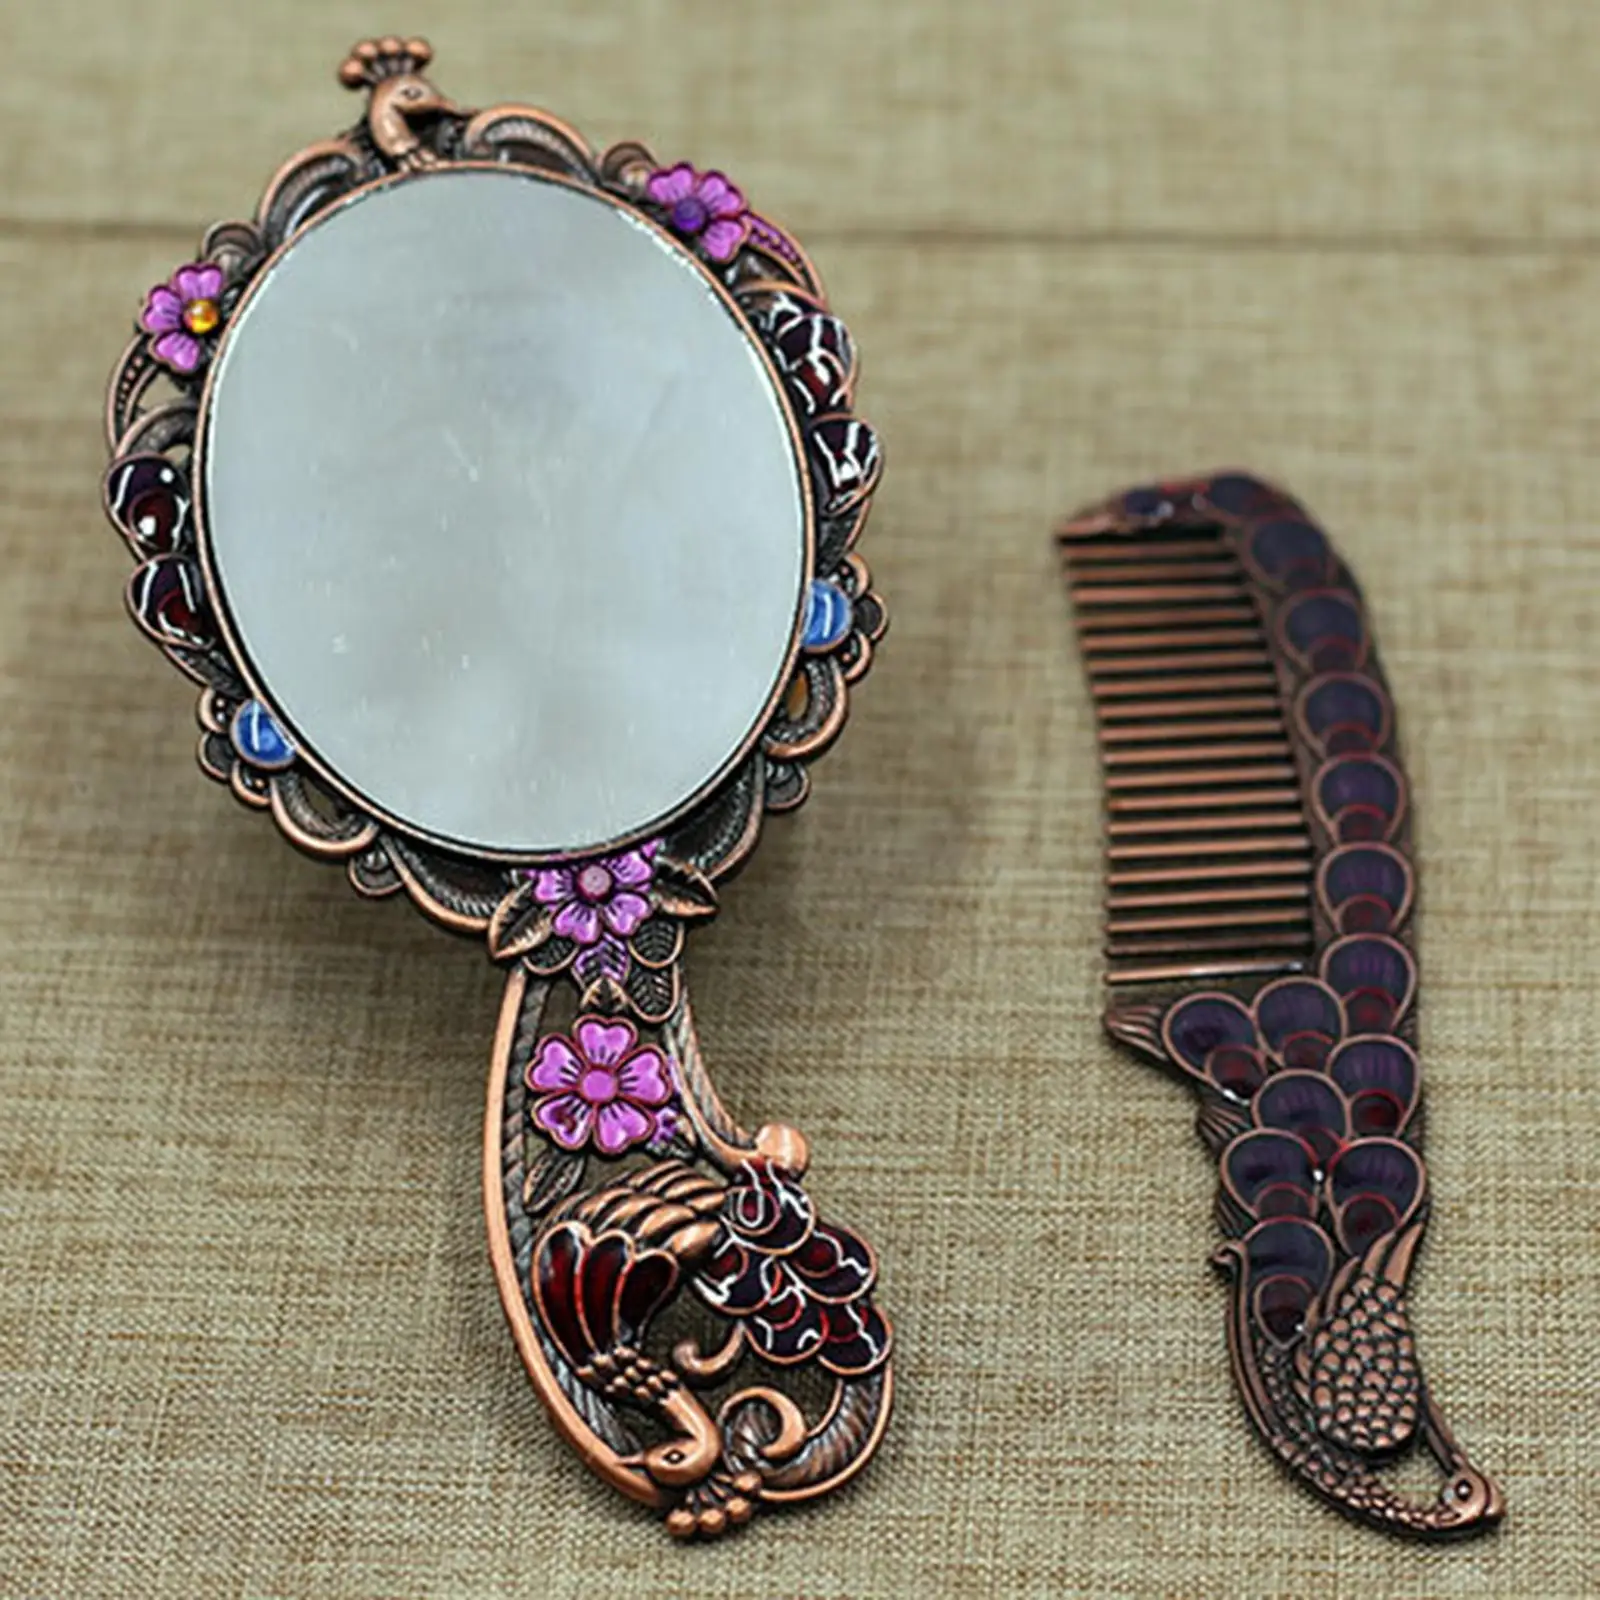 Retro Embossing Oval Peacock Make  Hand Held Comb Set  Cosmetic Mirror Vanity Mirror Portable Russian Style Table Mirror